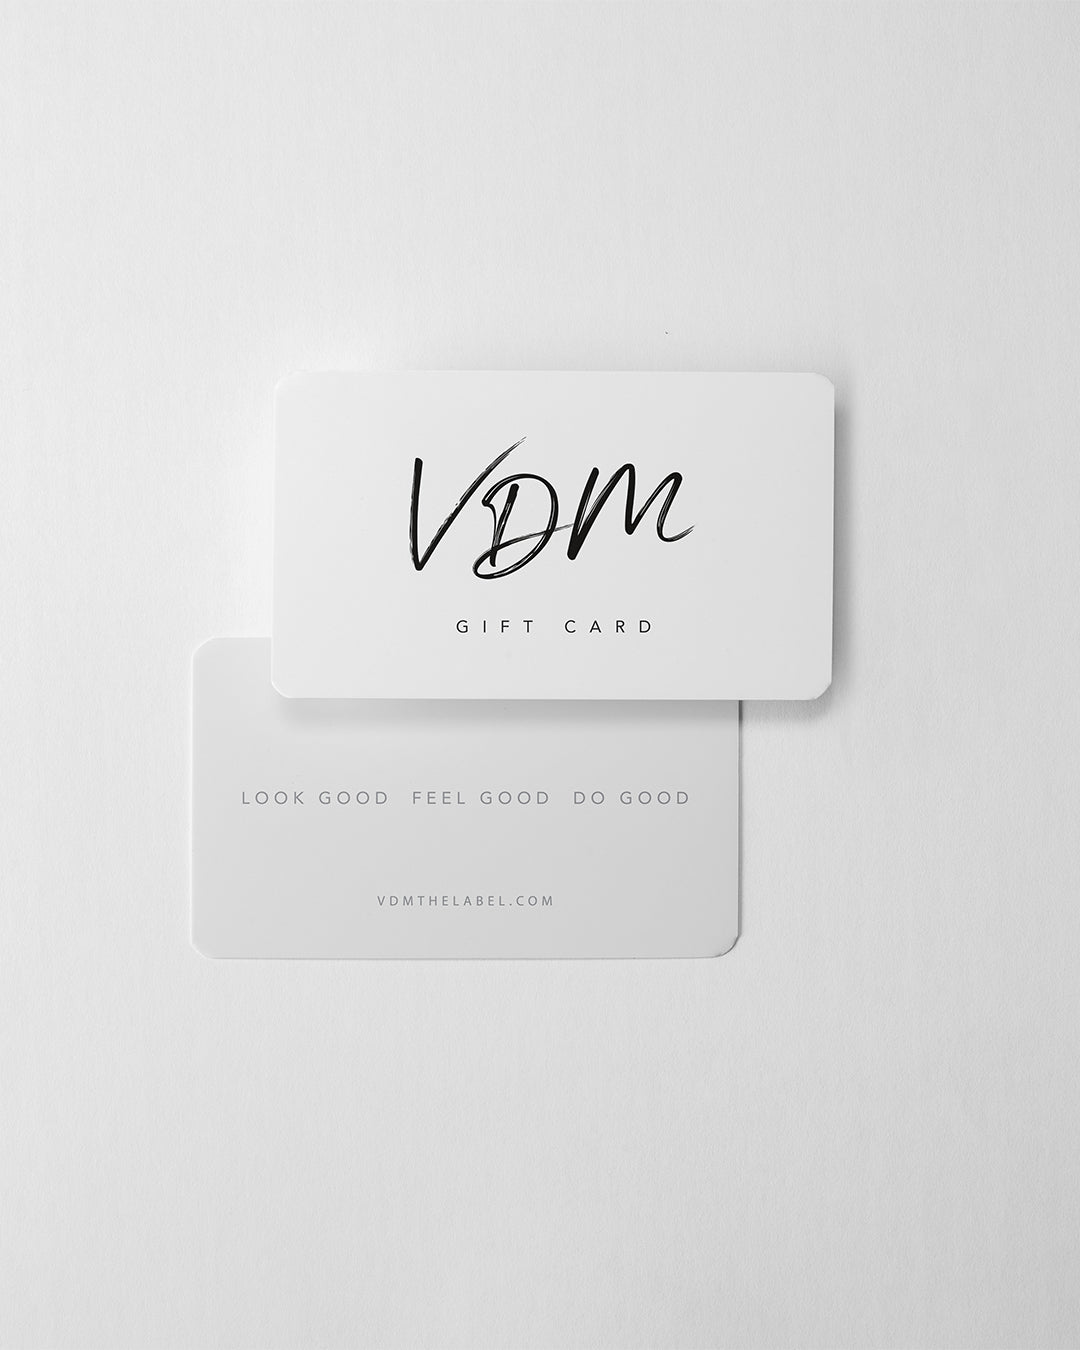 GIFT CARD - VDM THE LABEL